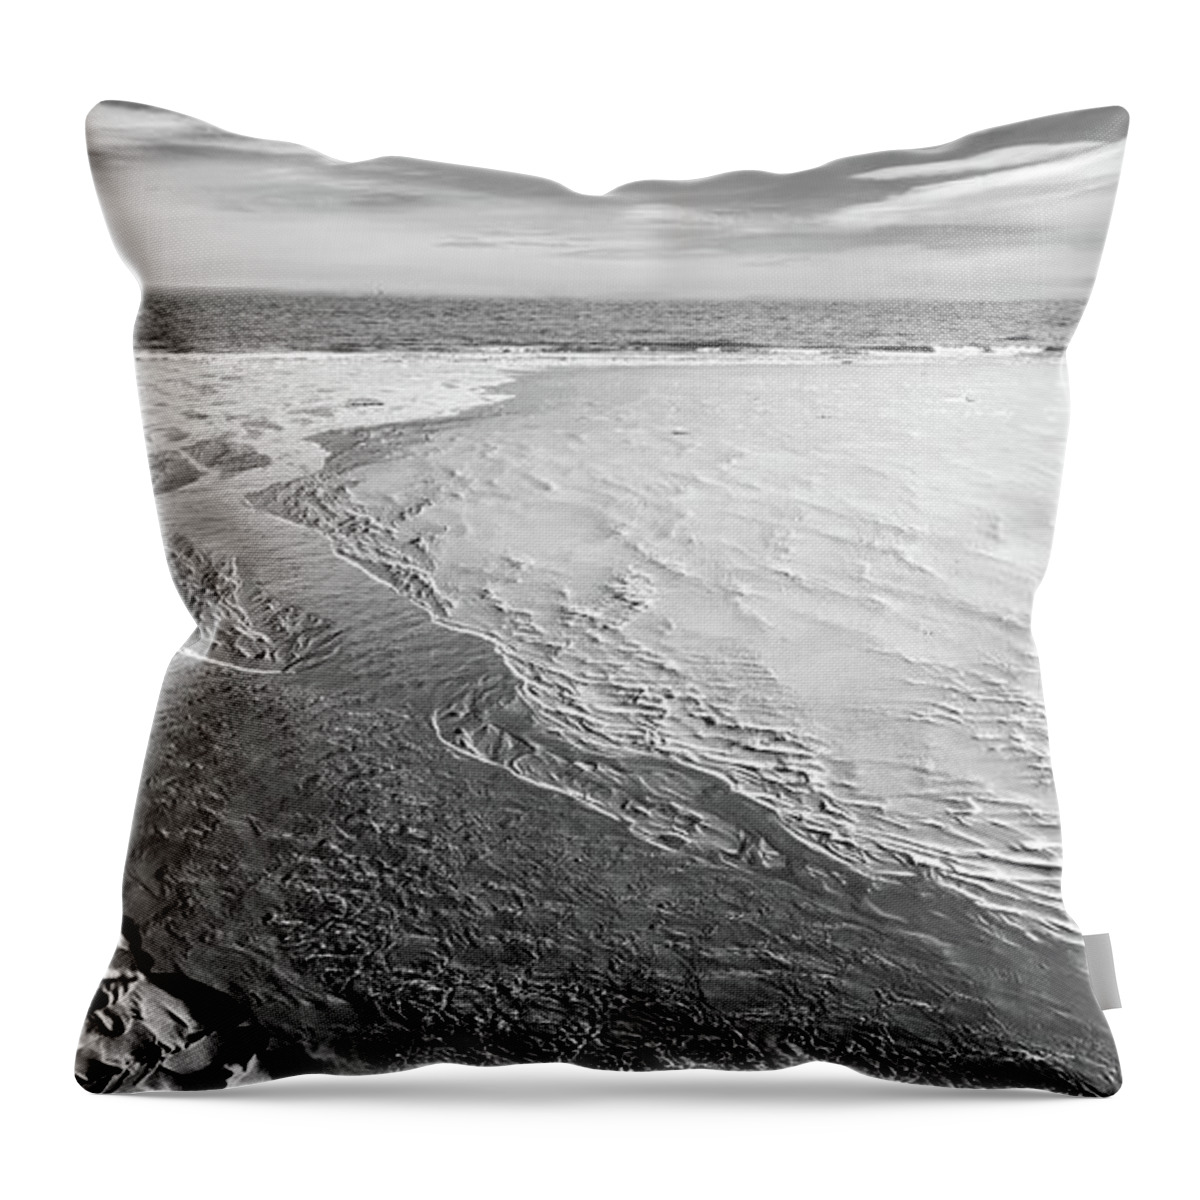 Beach Throw Pillow featuring the photograph Low Tide by Jacky Gerritsen